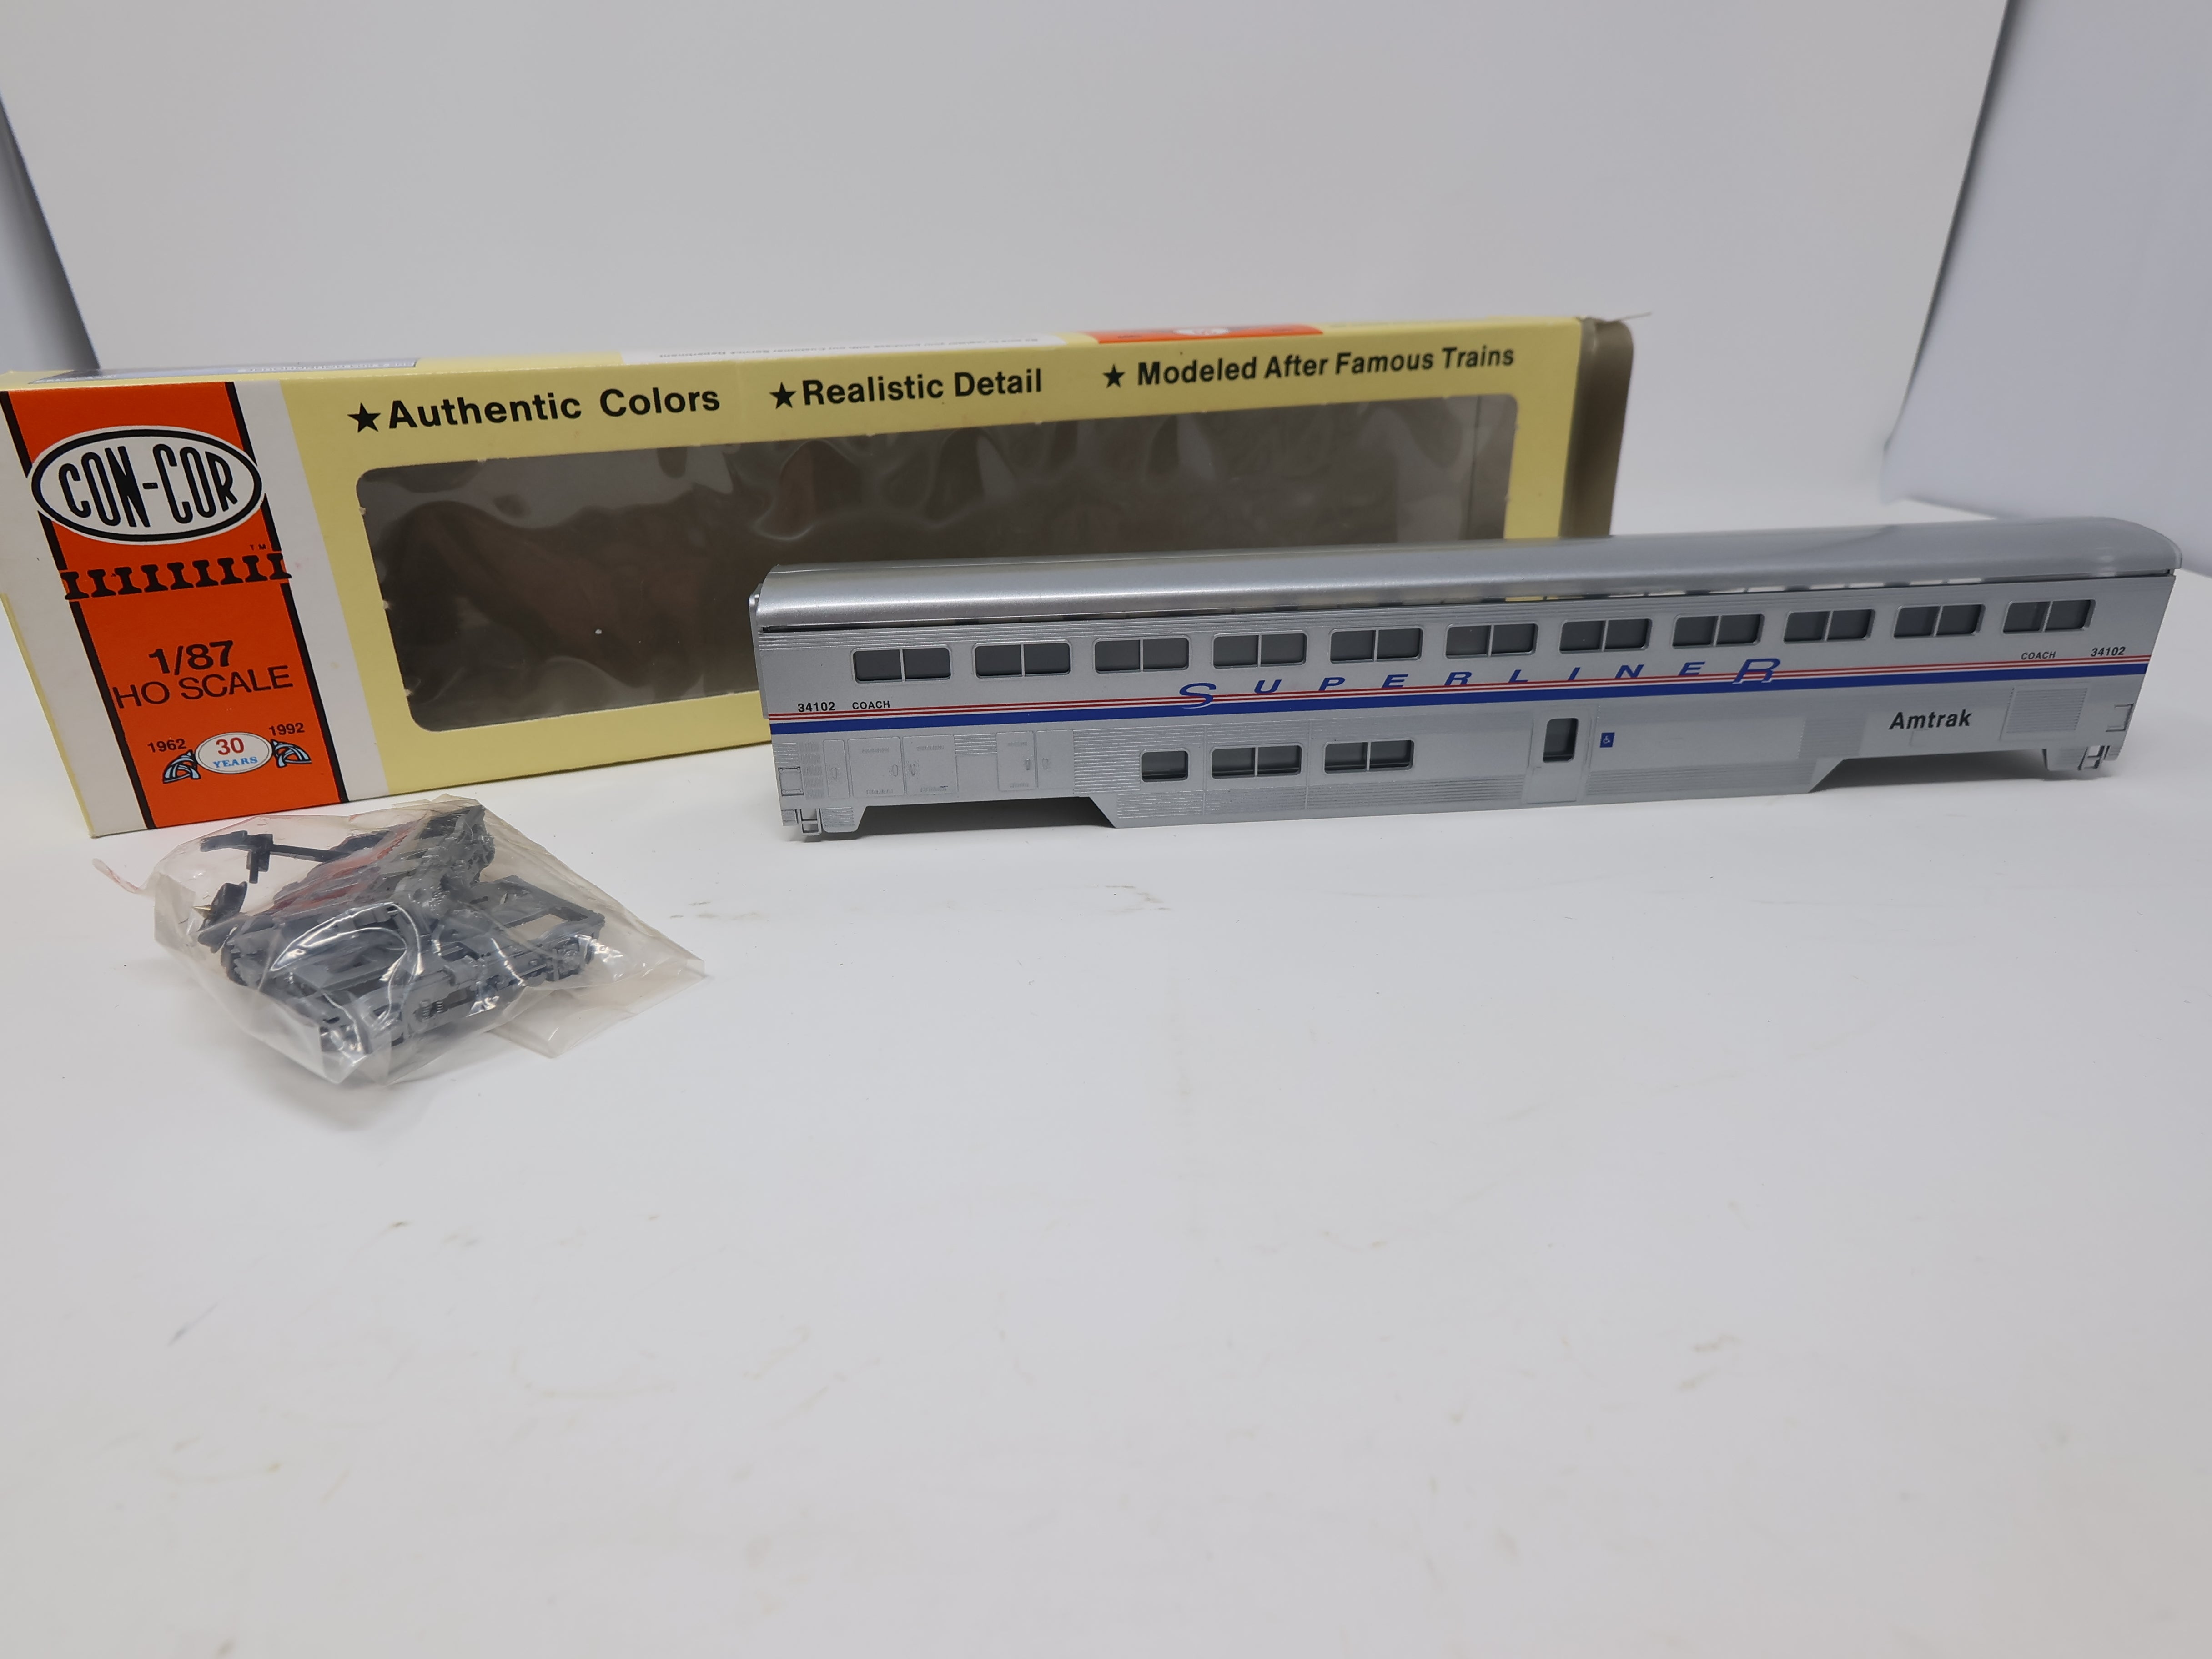 USED Con-Cor HO Scale, Superliner Coach Car Phase 4 Scheme, Amtrak #34102